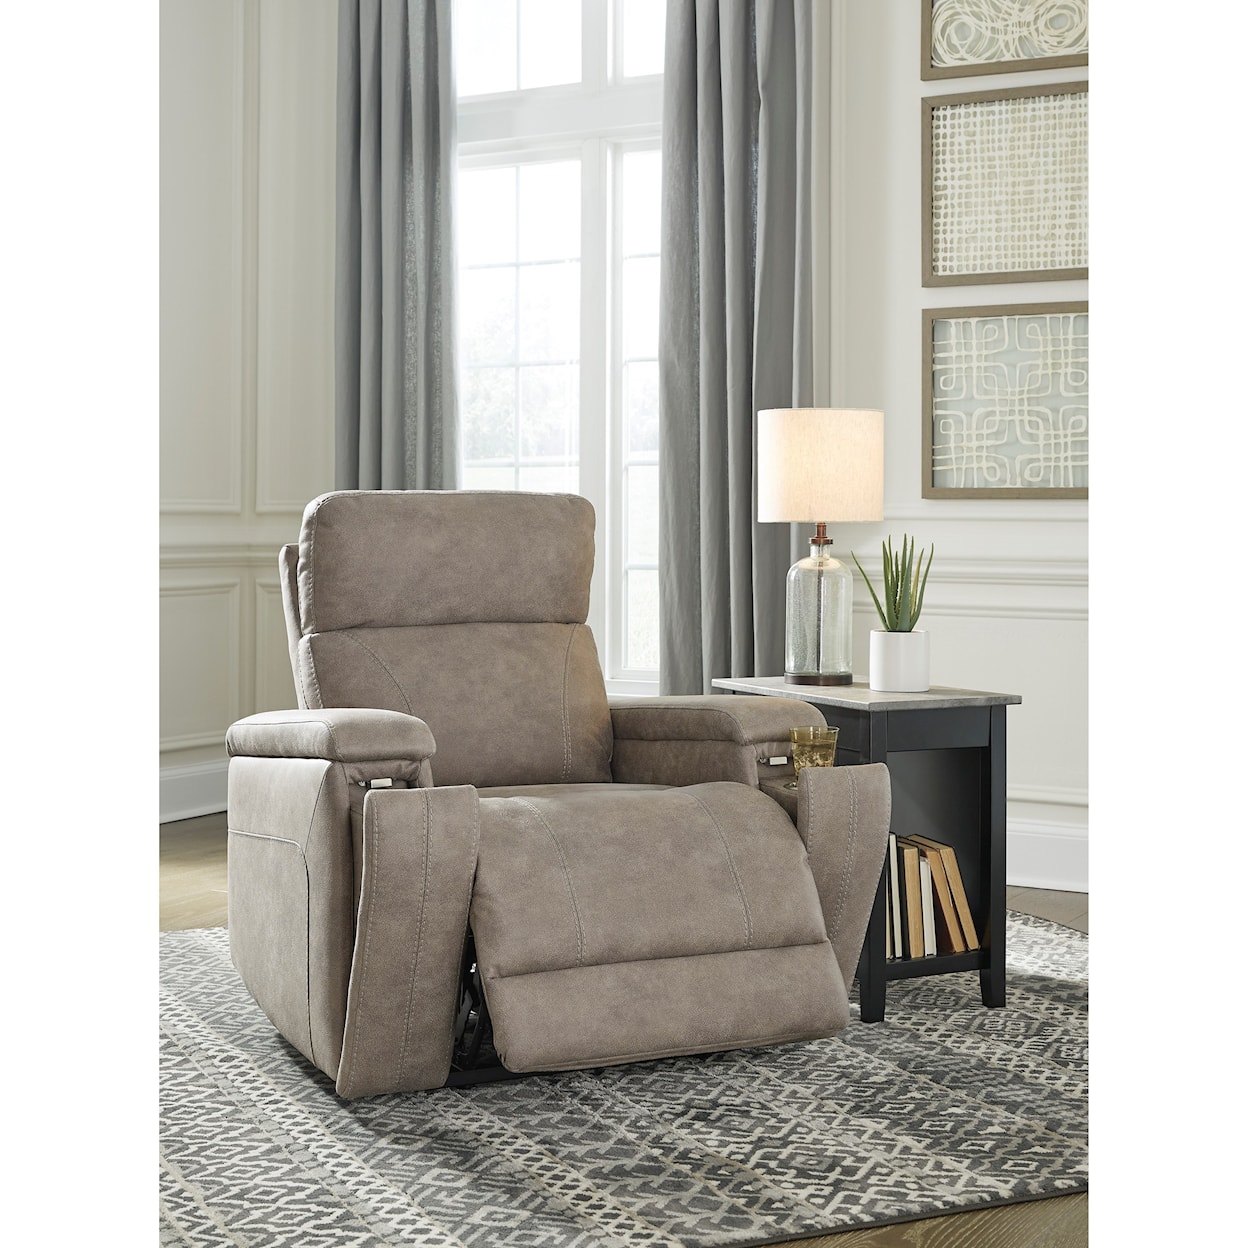 Signature Design by Ashley Rowlett Power Recliner with Adjustable Headrest